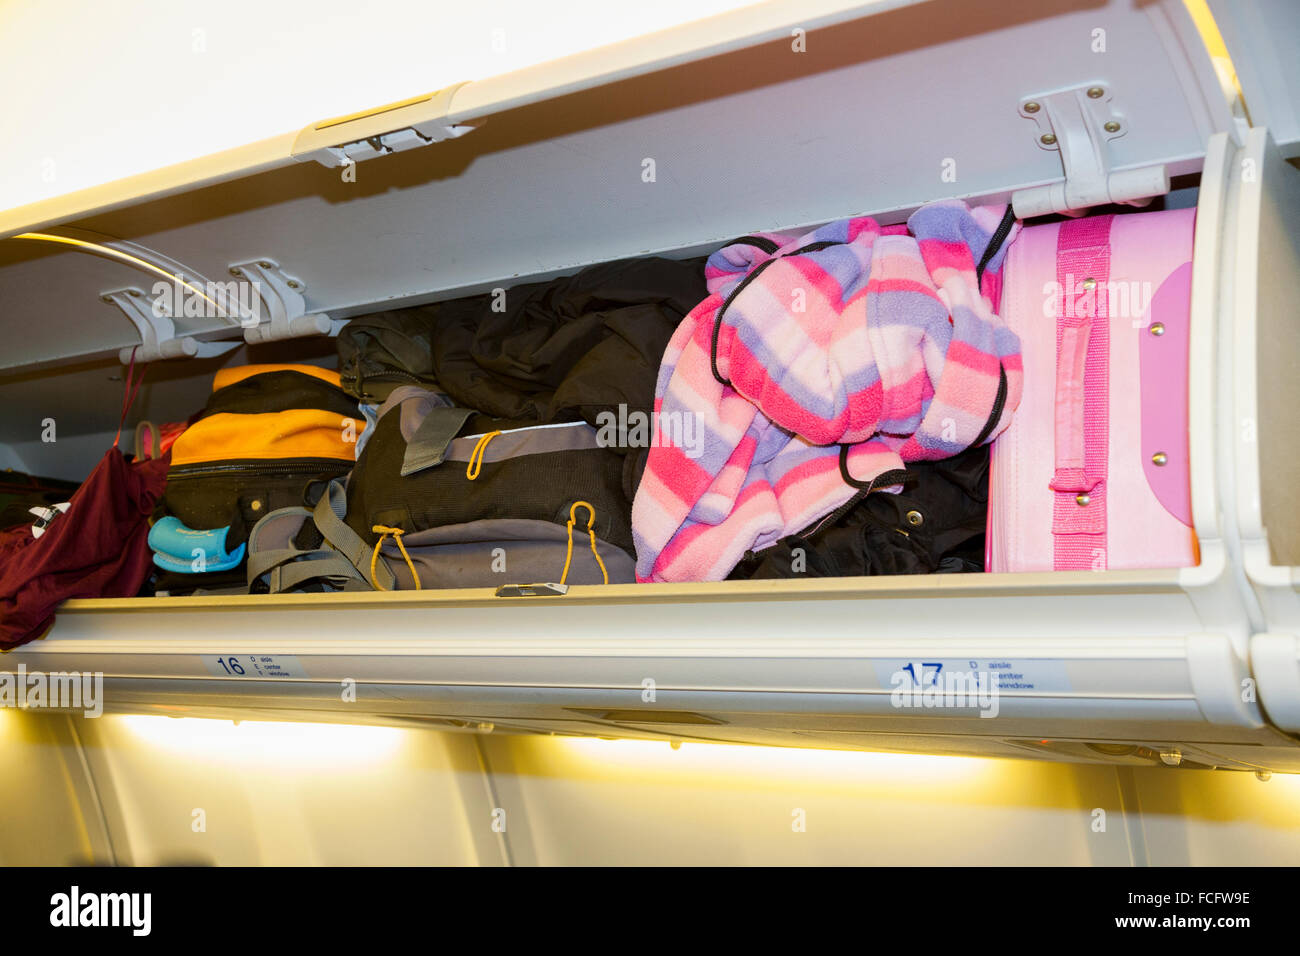 Overhead passenger locker / lockers / compartment / compartments for stowing passengers bags cabin luggage baggage. KLM Airbus aircraft Stock Photo